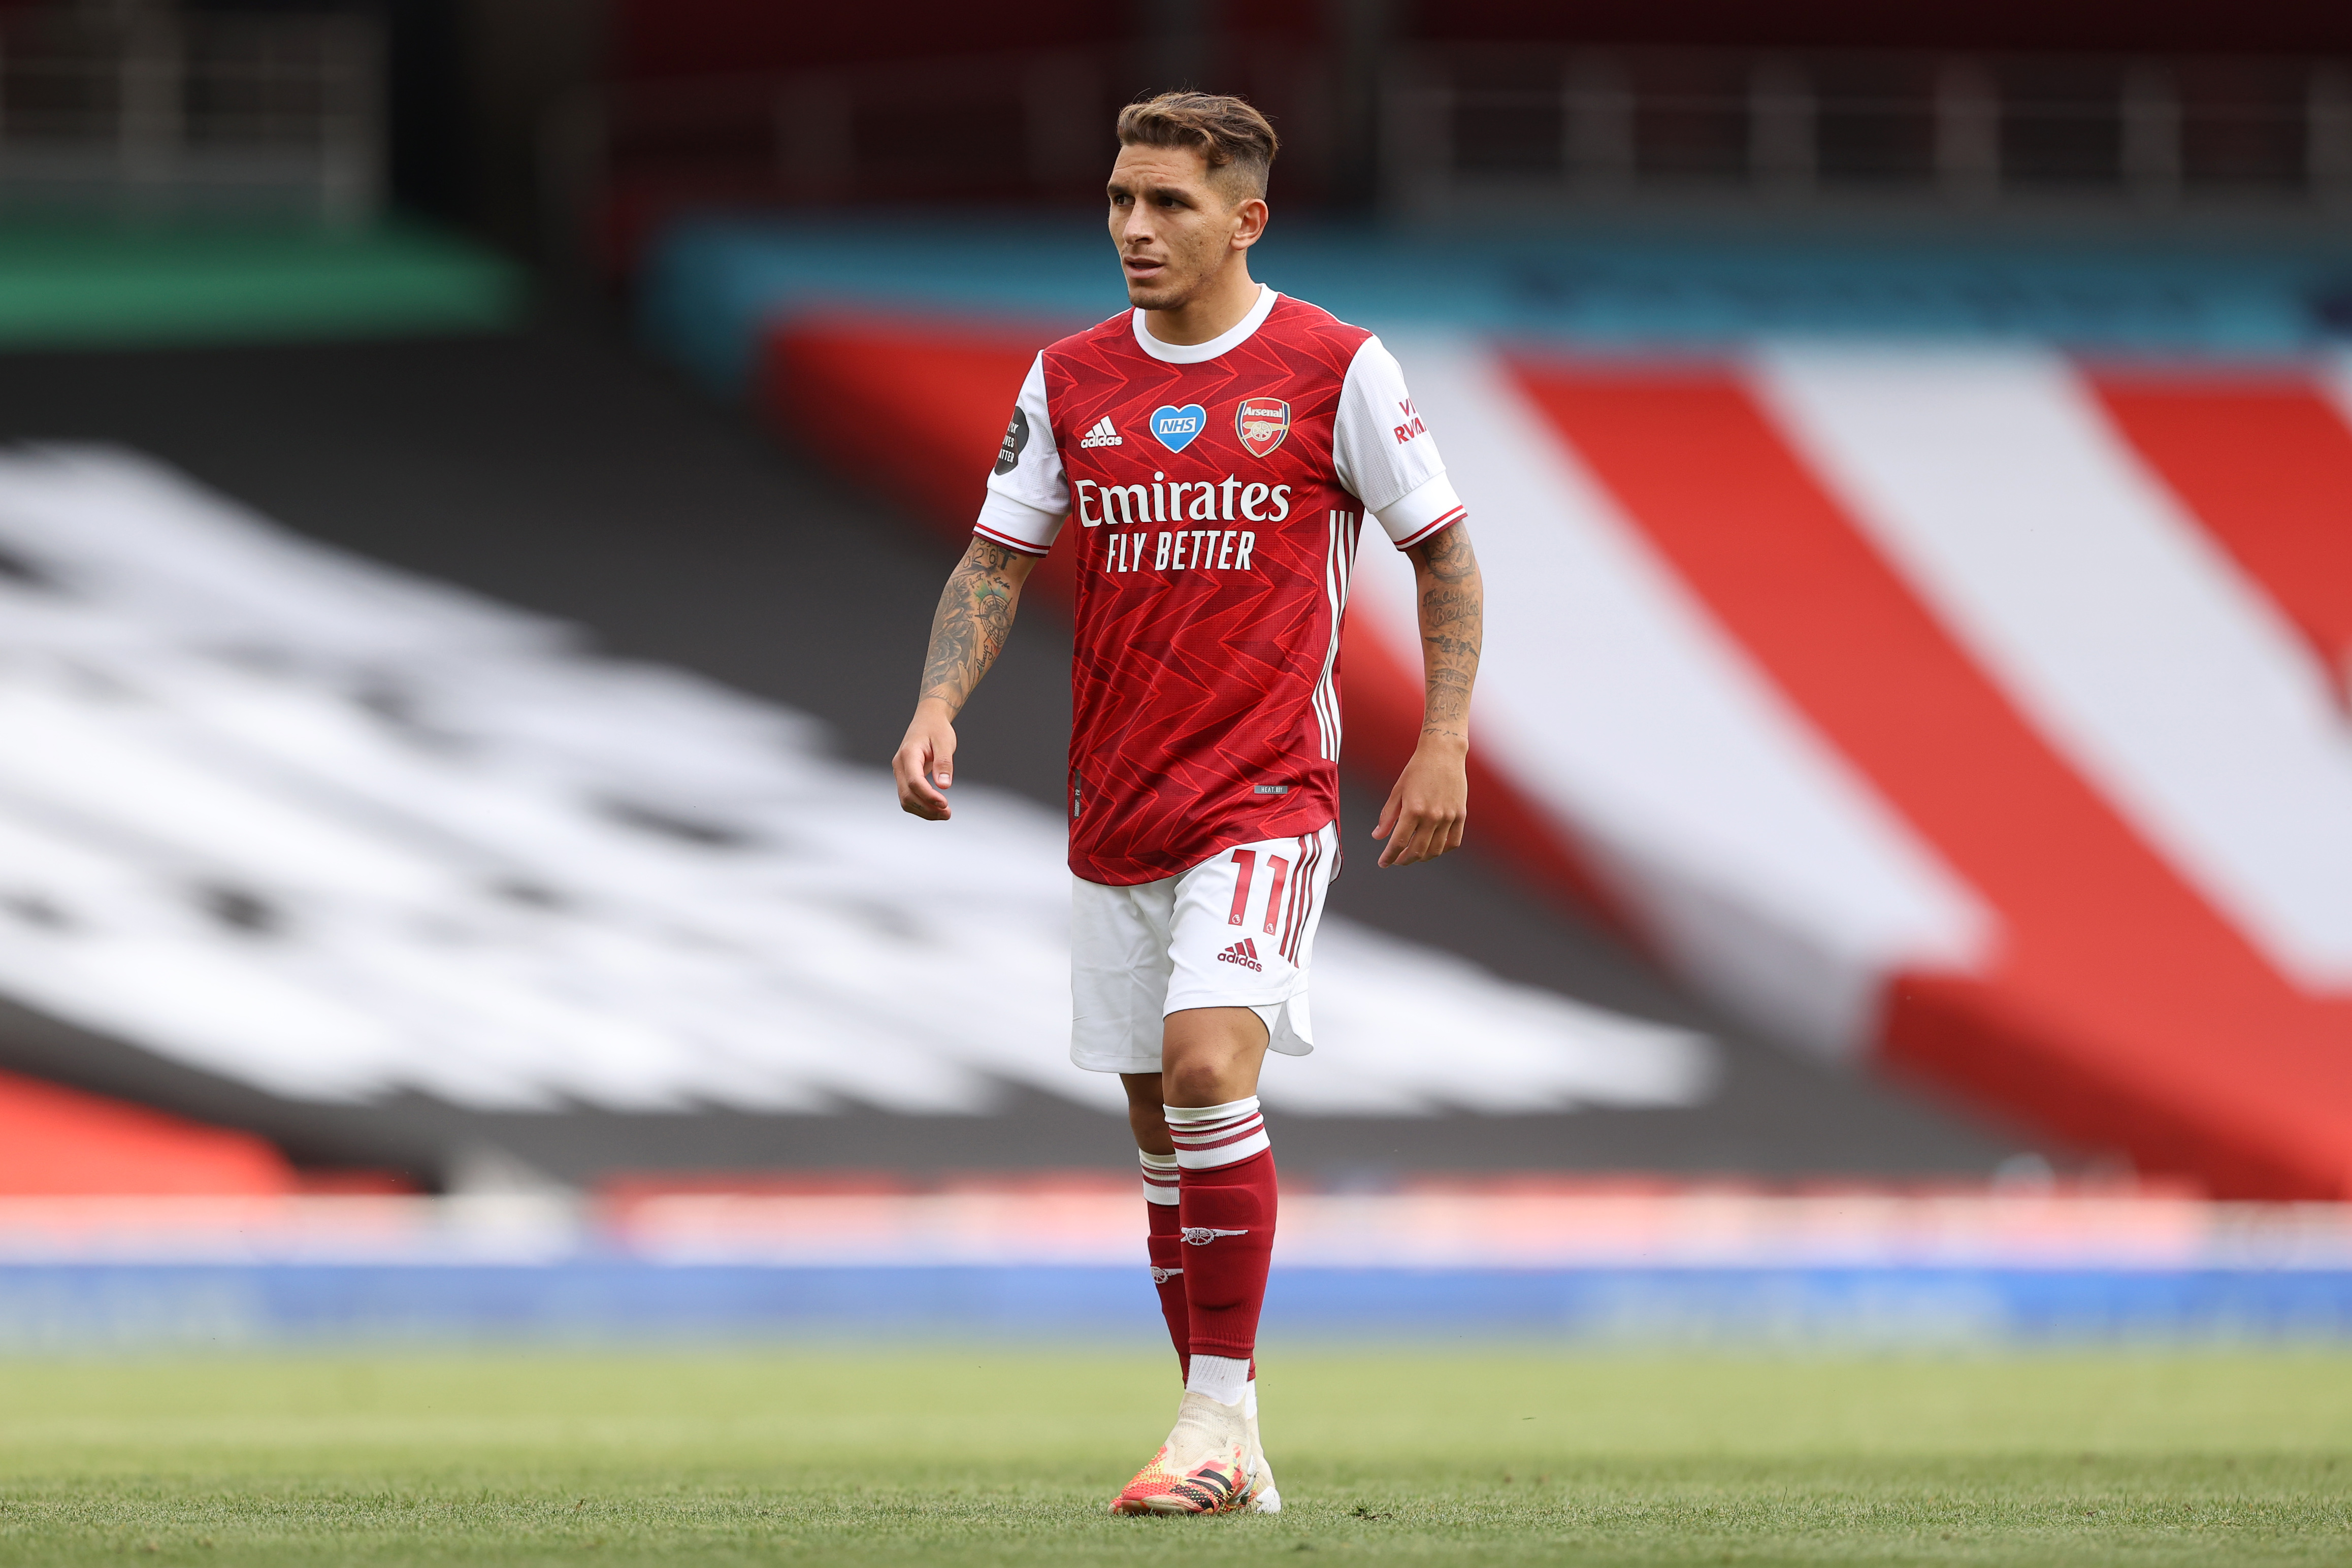 Arsenal transfer news: All the latest on Aouar, Partey, Torreira and more ahead of deadline day